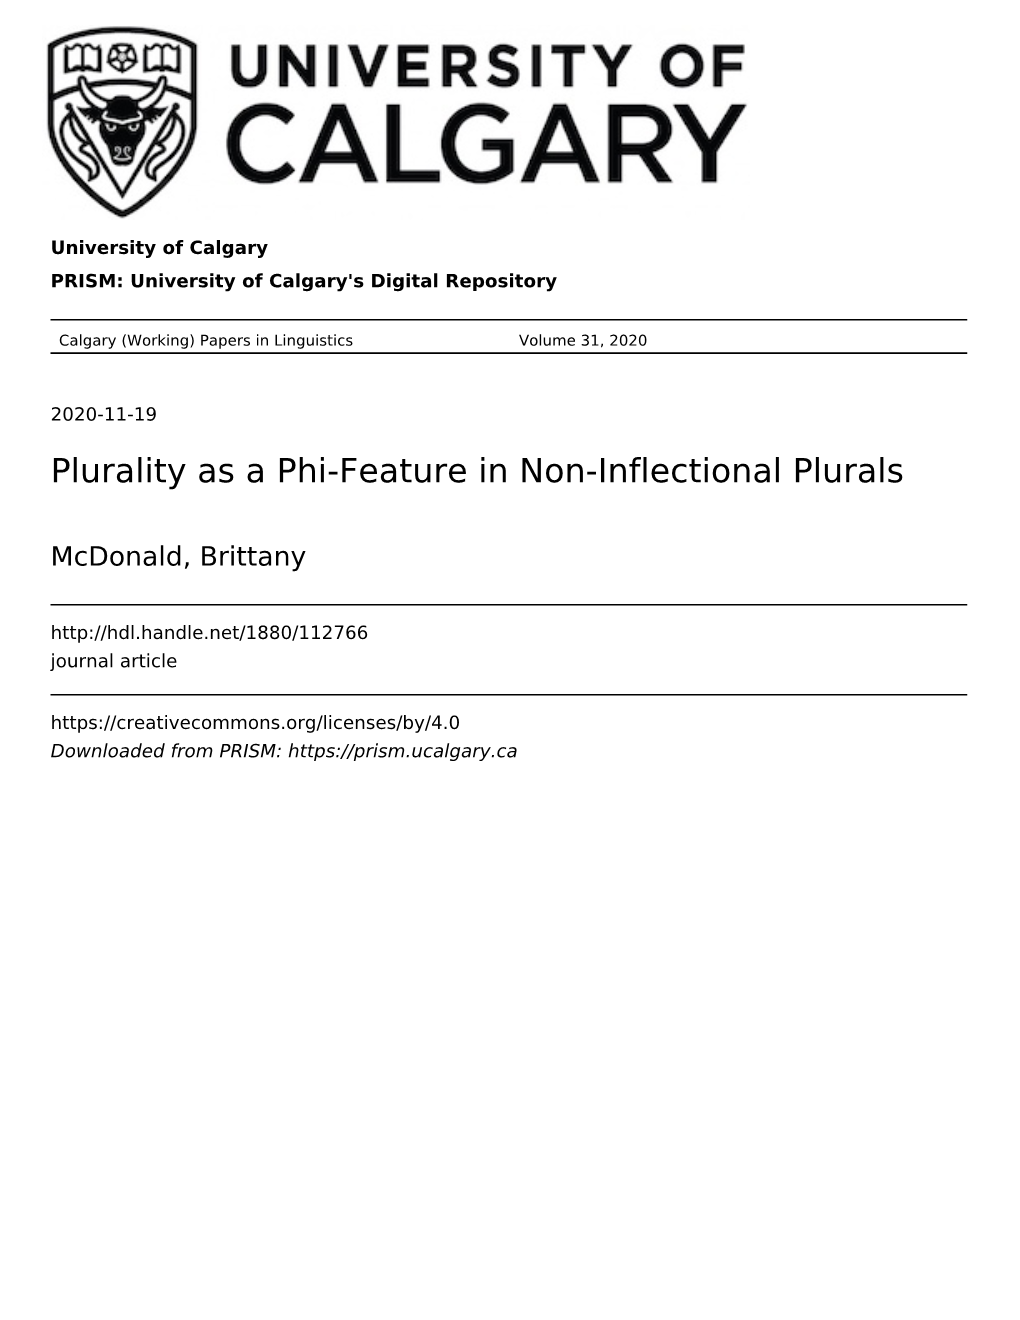 Plurality As a Phi-Feature in Non-Inflectional Plurals